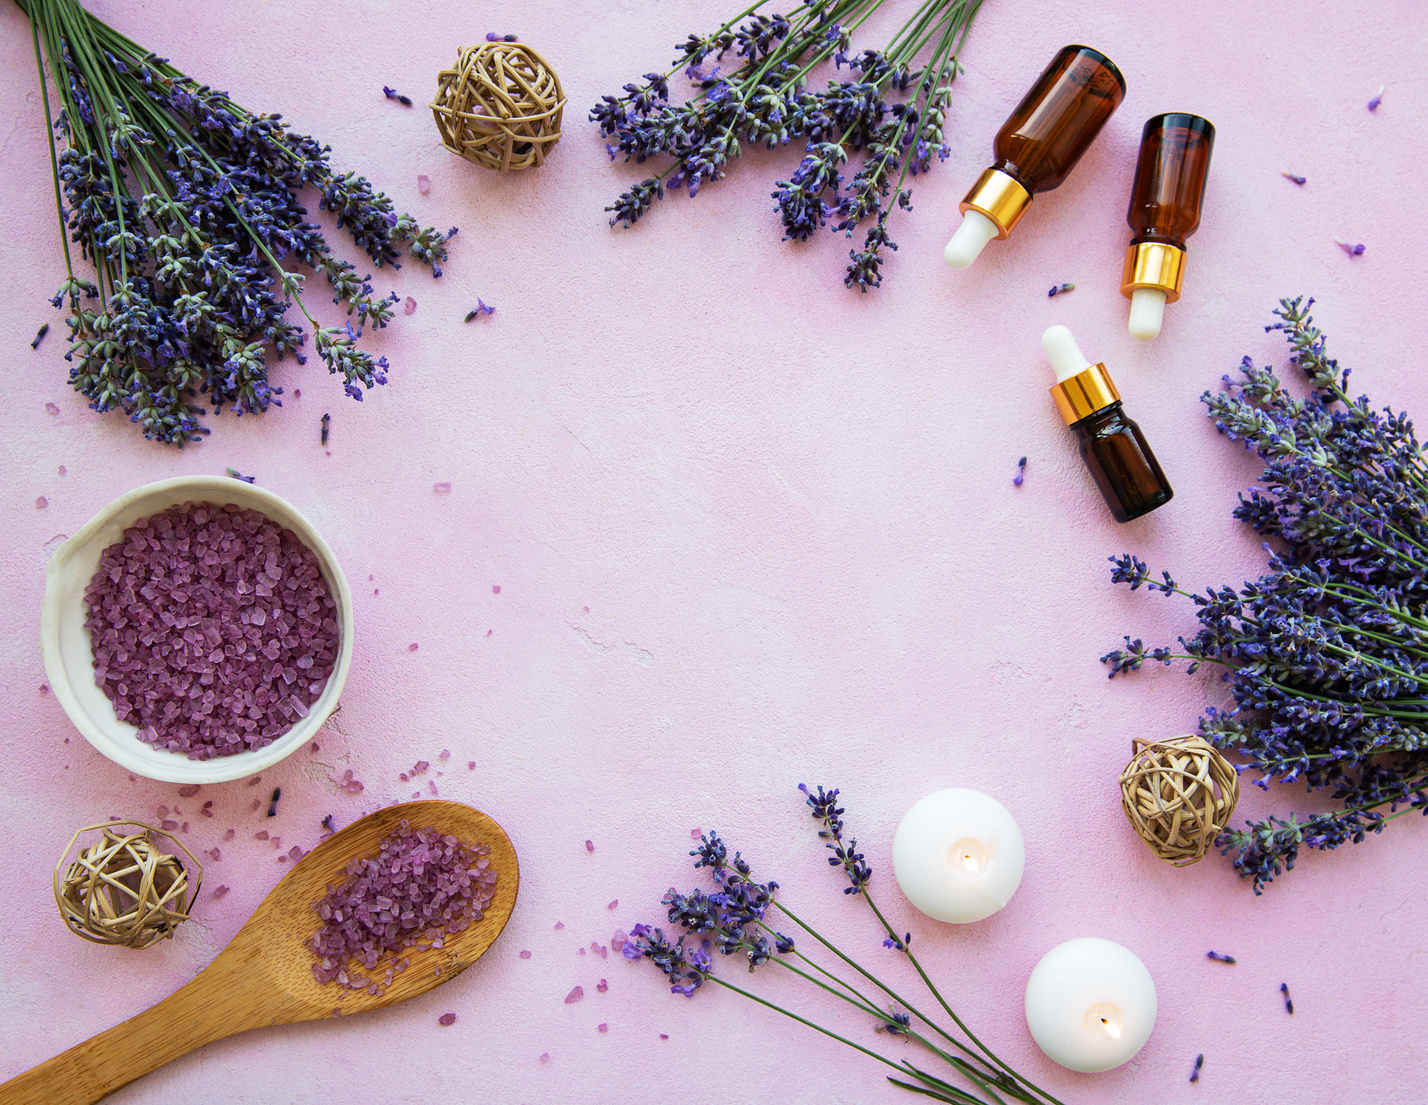 Lavender Flowers and Essential Oil Bottles on Purple Background